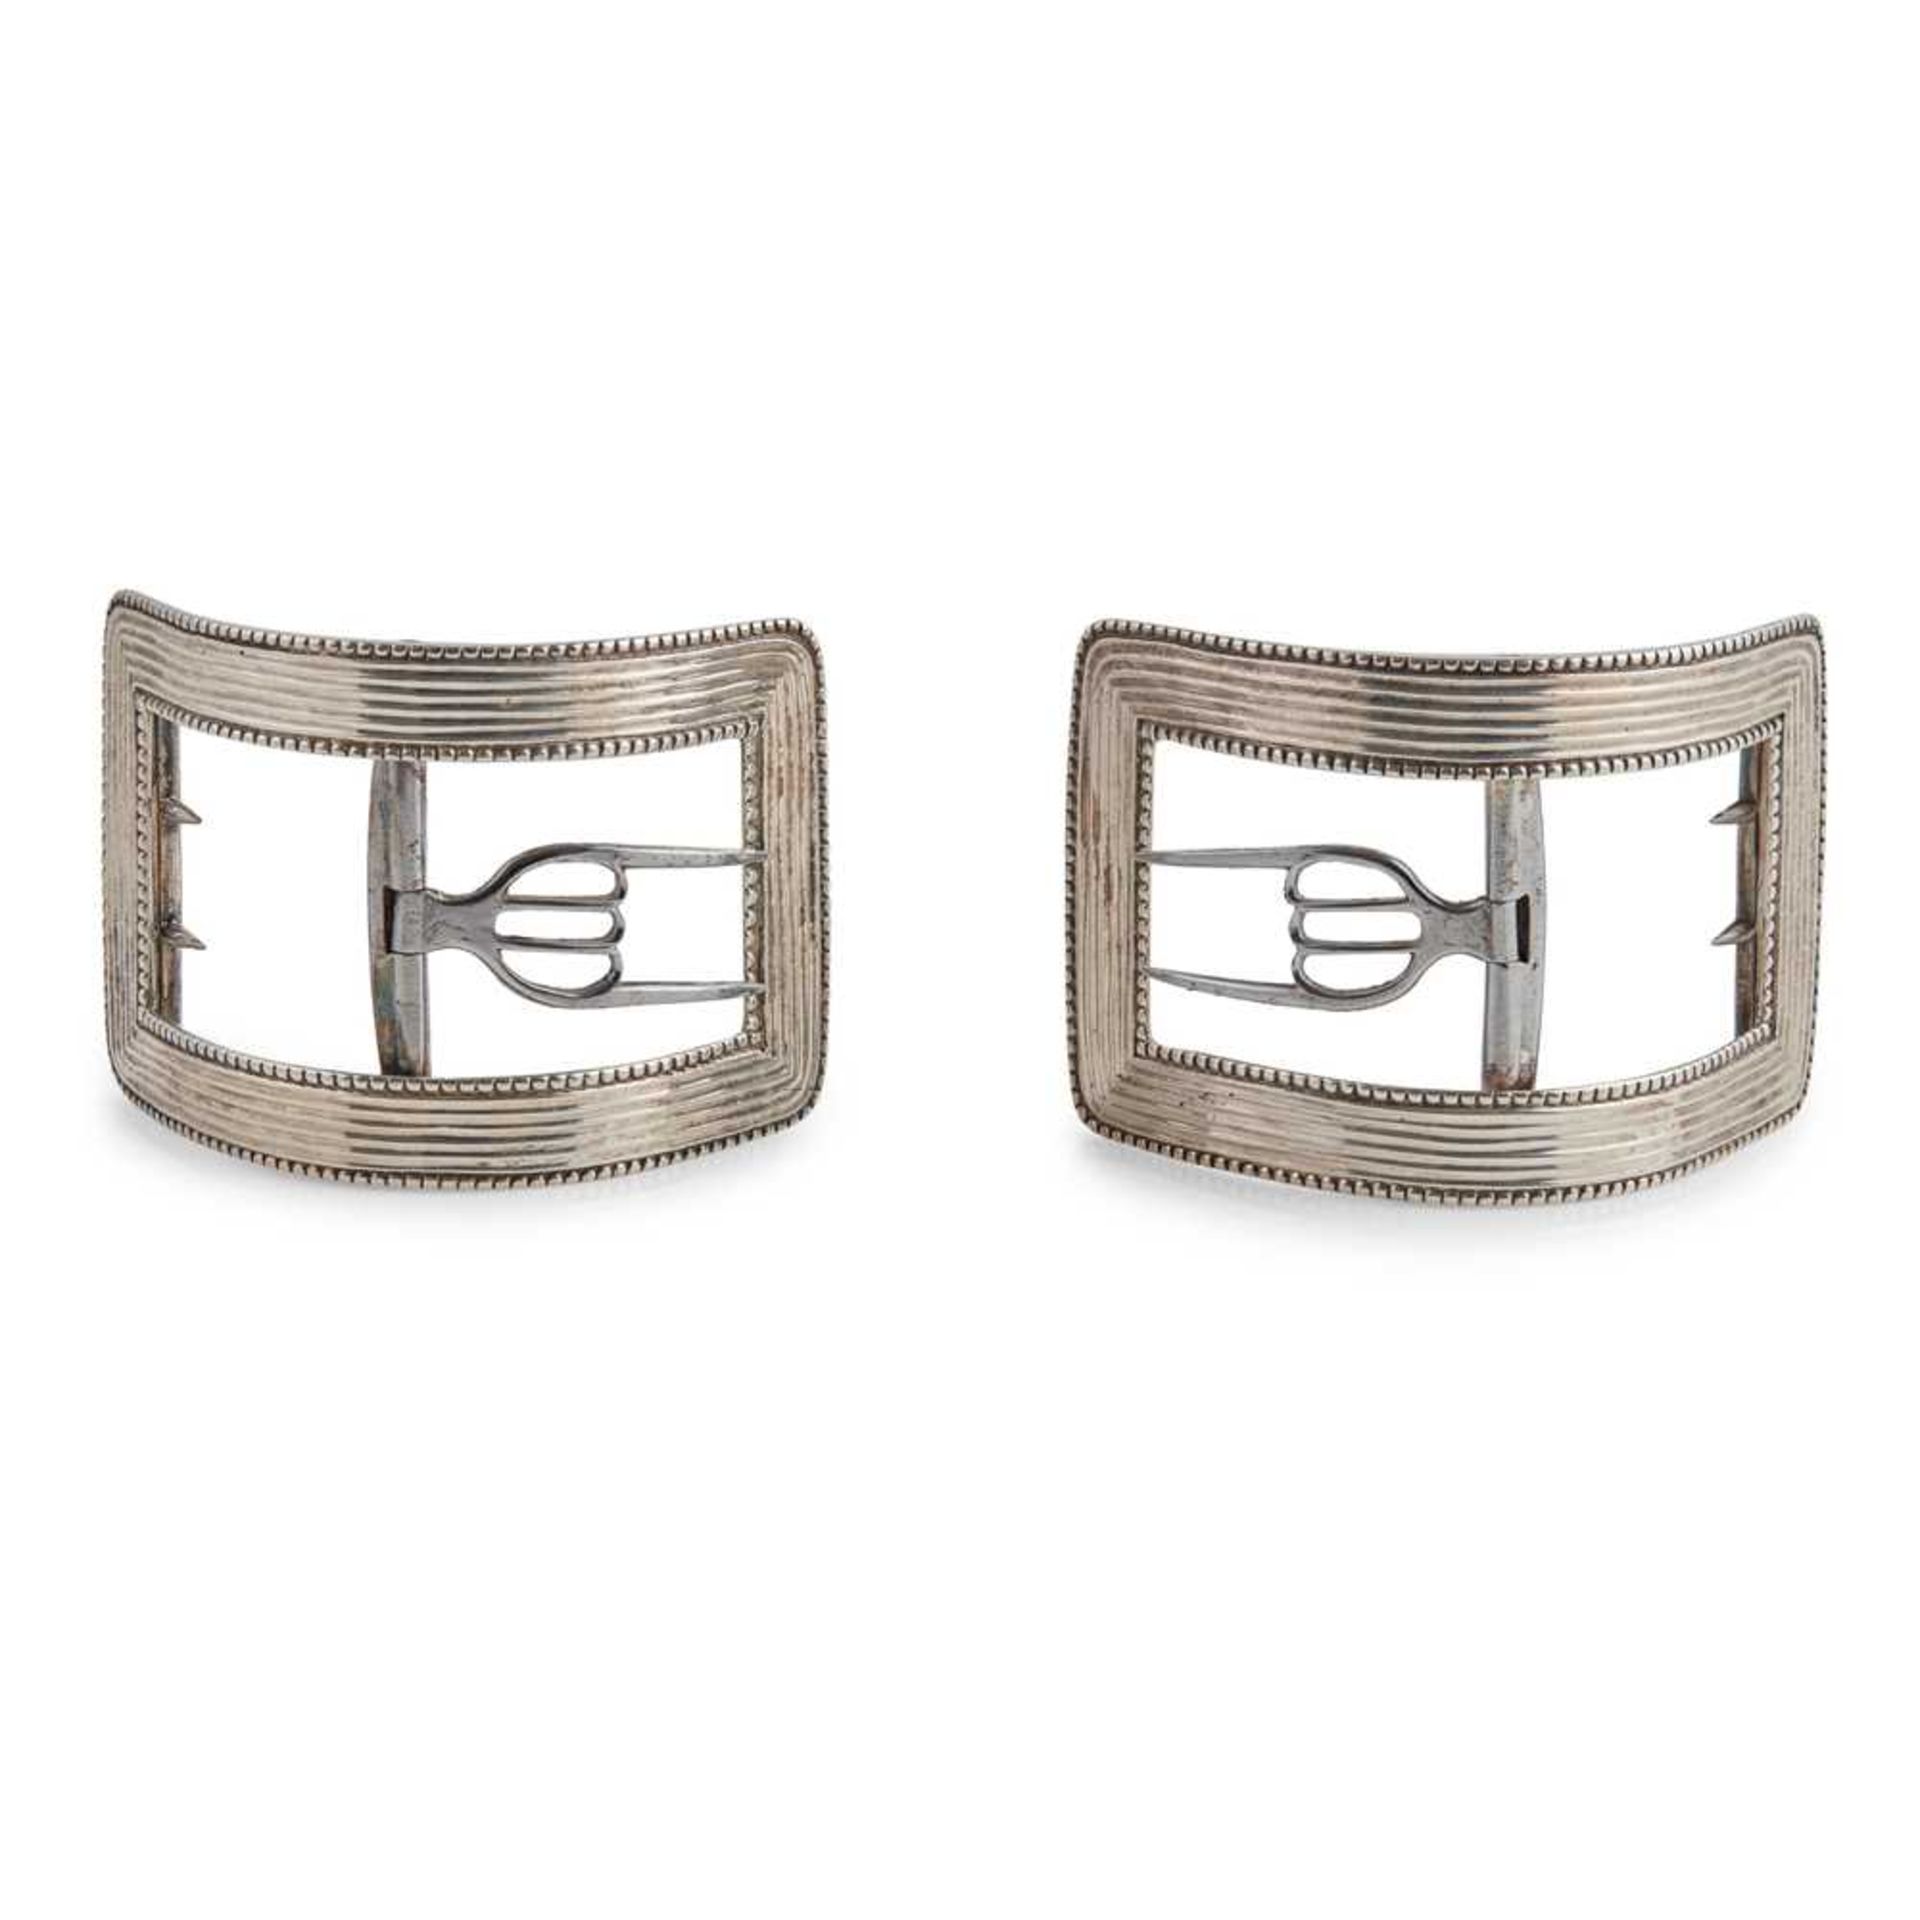 GLASGOW - A PAIR OF SCOTTISH PROVINCIAL SHOE BUCKLES ROBERT GRAY